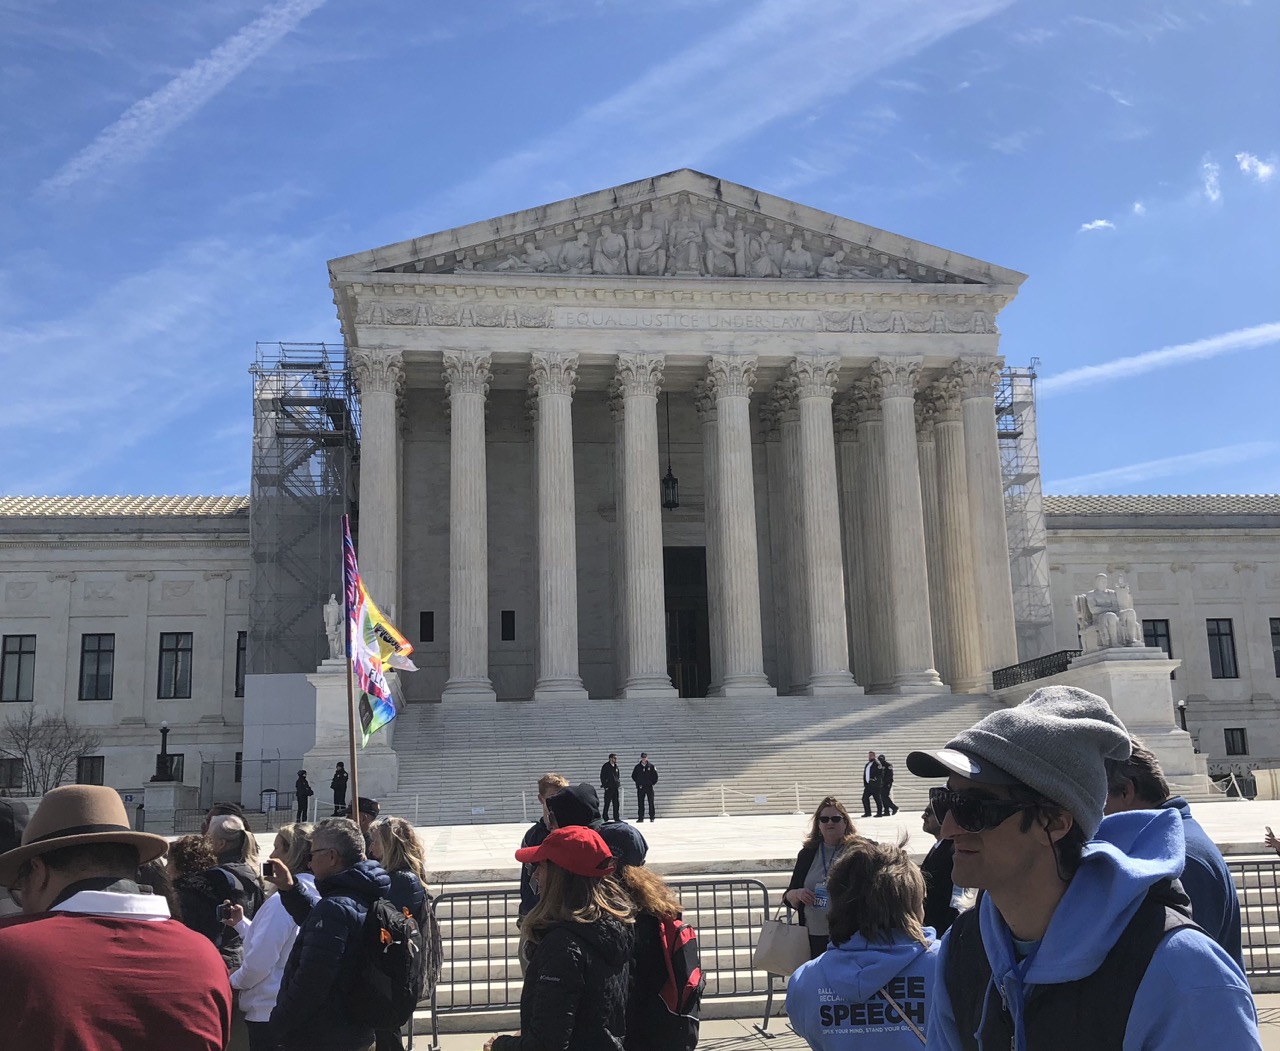 With important free speech/censorship legislation before SCOTUS, L Todd Wood was asked to speak at a rally in front of the court. CDM also sponsored the event.